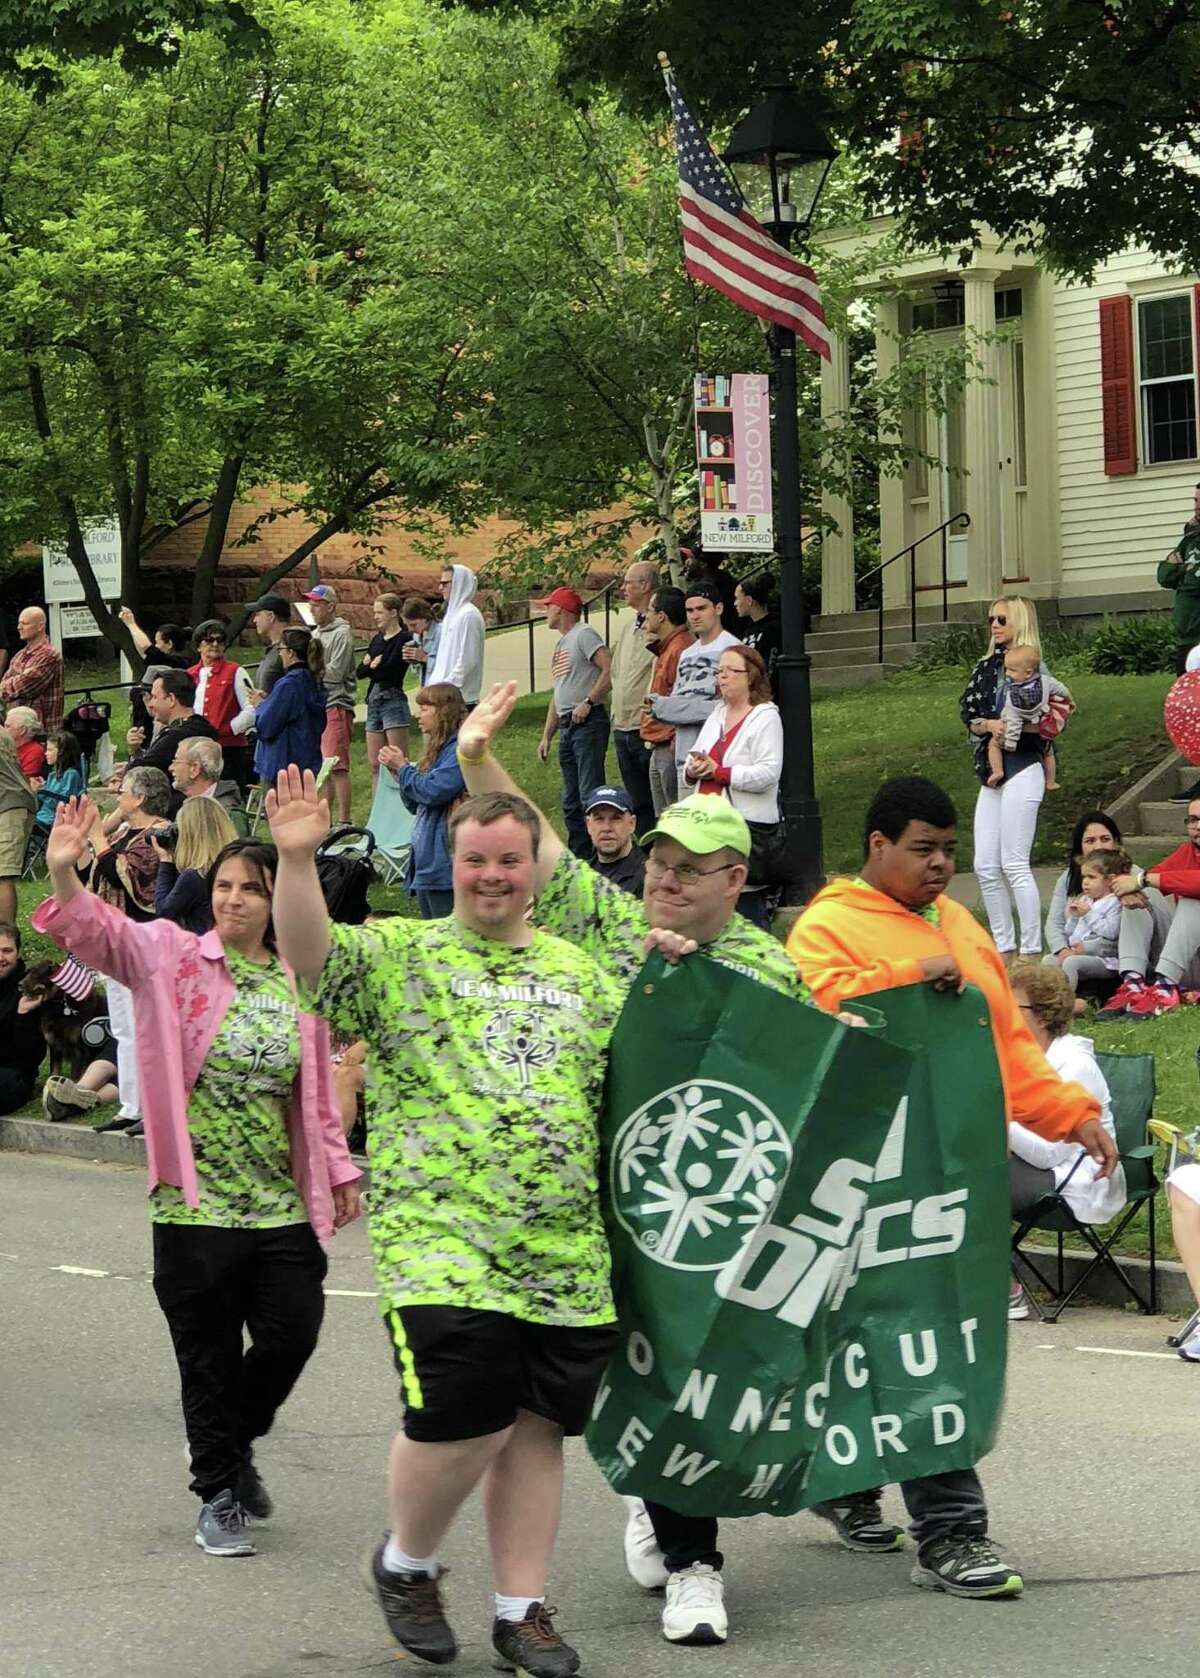 Individuals representing Special Olympics proudly wave to the crowds lining Main Street during New Milford's Memorial Day parade May 28, 2018.